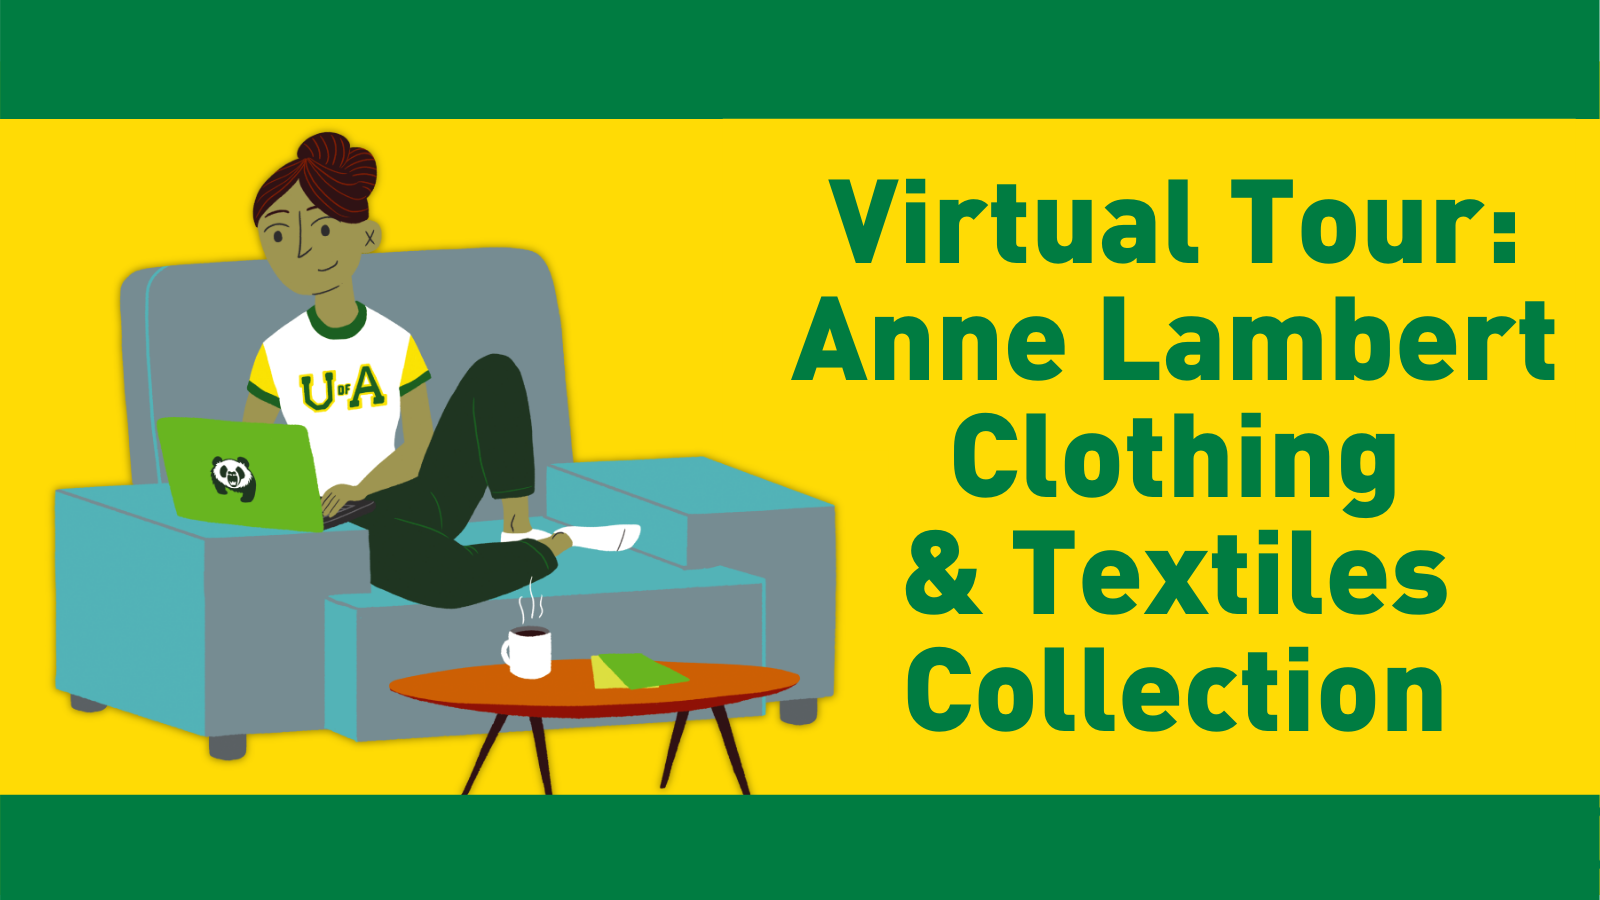 Virtual Tour: Anne Lambert Clothing & Textiles Collections